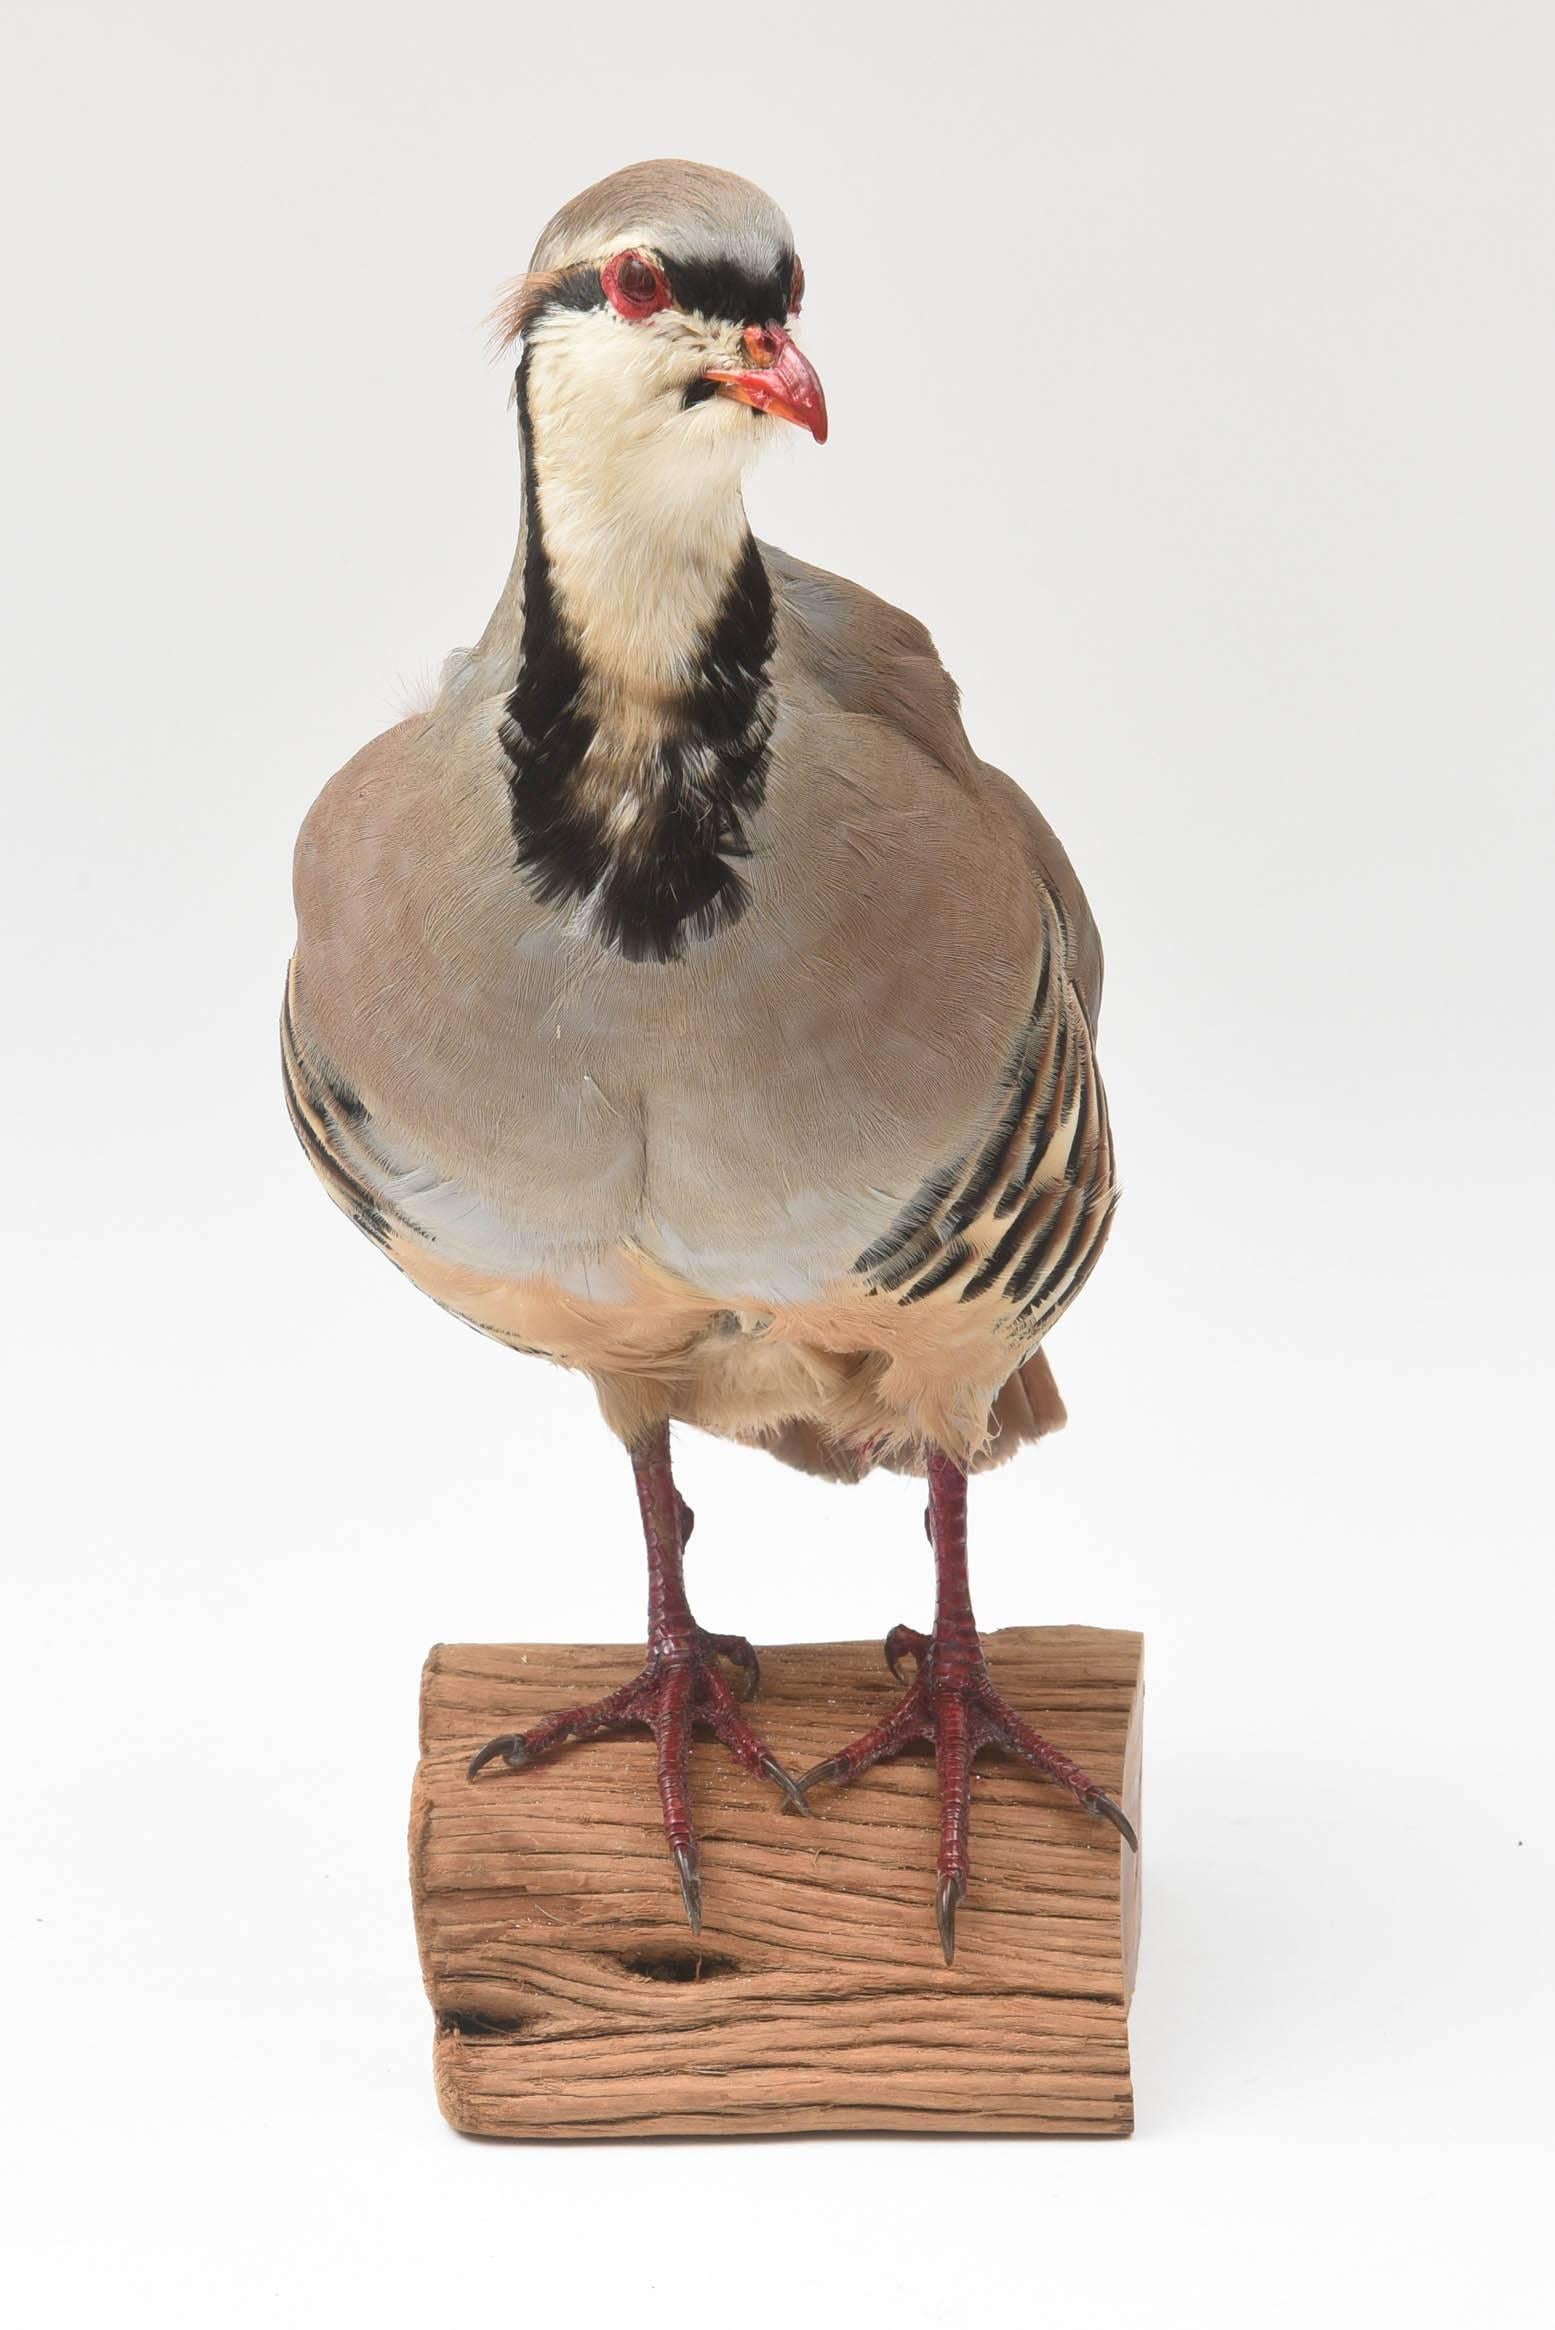 A charming piece for your home or office. This fellow has really nice colors and great plumage.